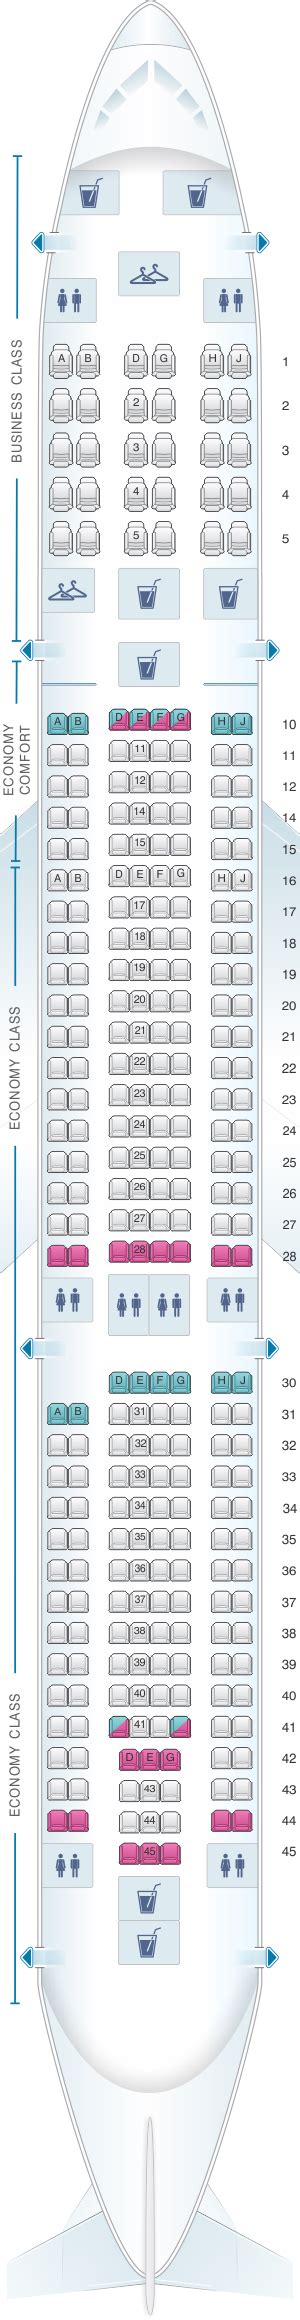 Seat Map Klm Airbus A330 300